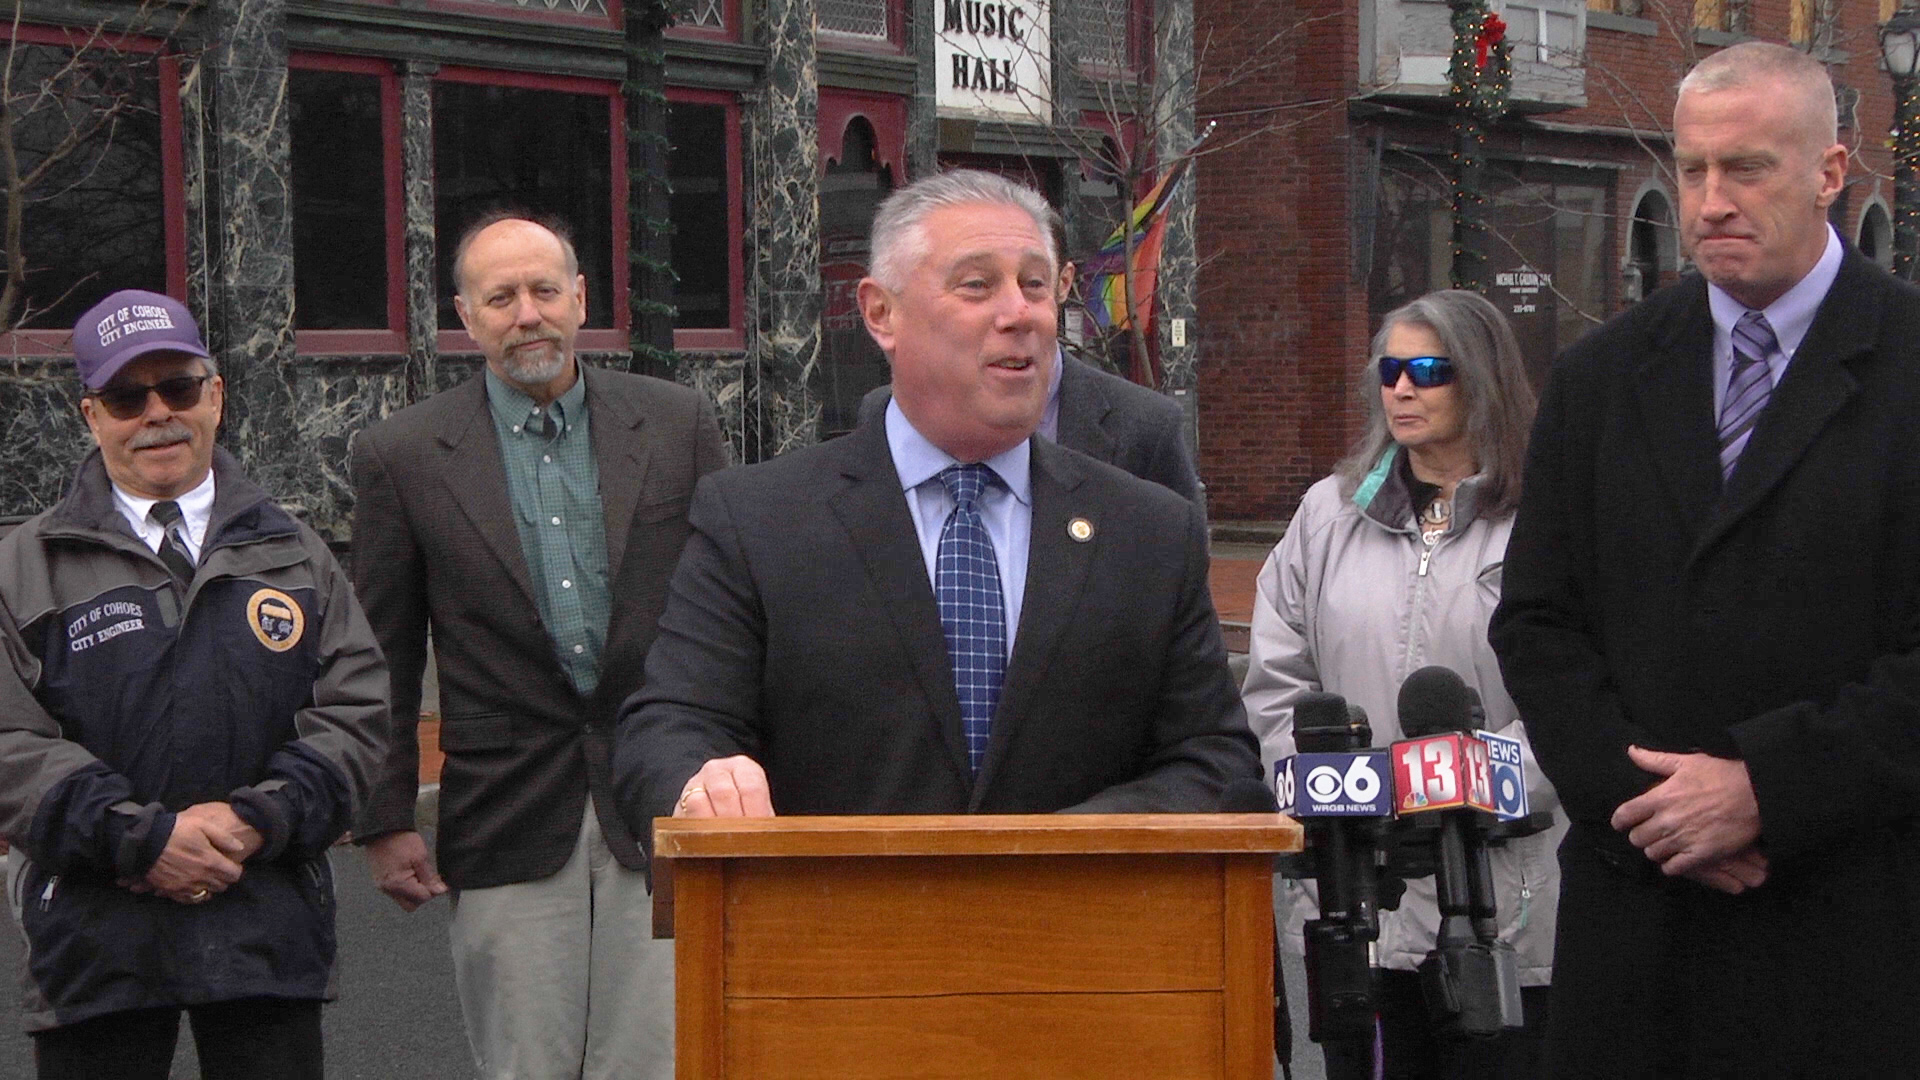 McDonald Announces Funding for the Restoration of Cohoes Music Hall